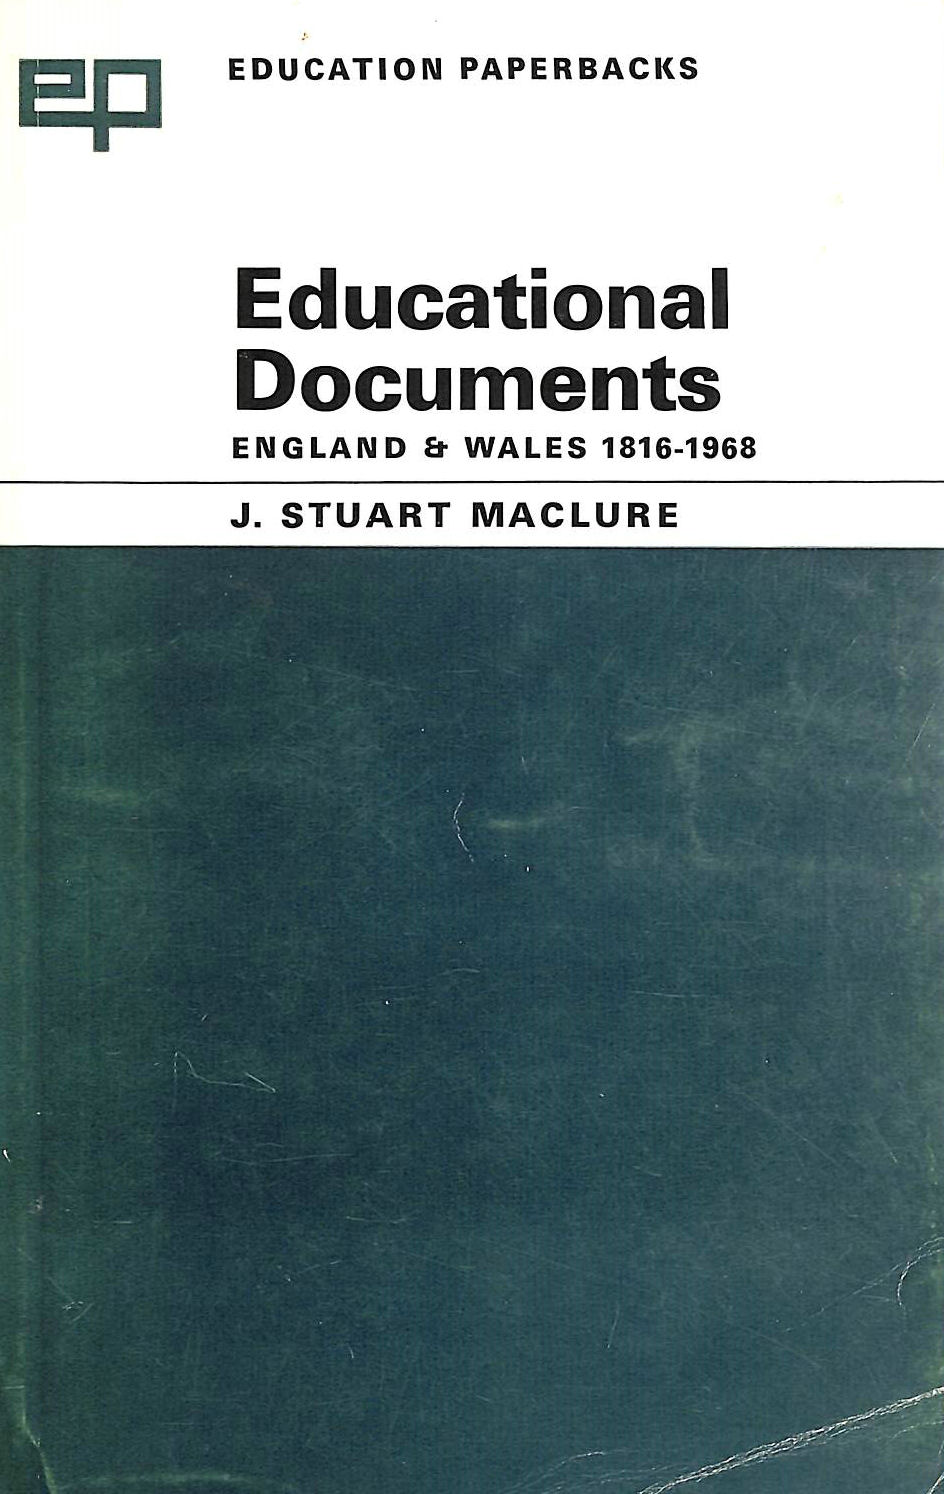 MACLURE, J.S. - Educational Documents in England and Wales, 1816-1967 (Education Paperbacks)